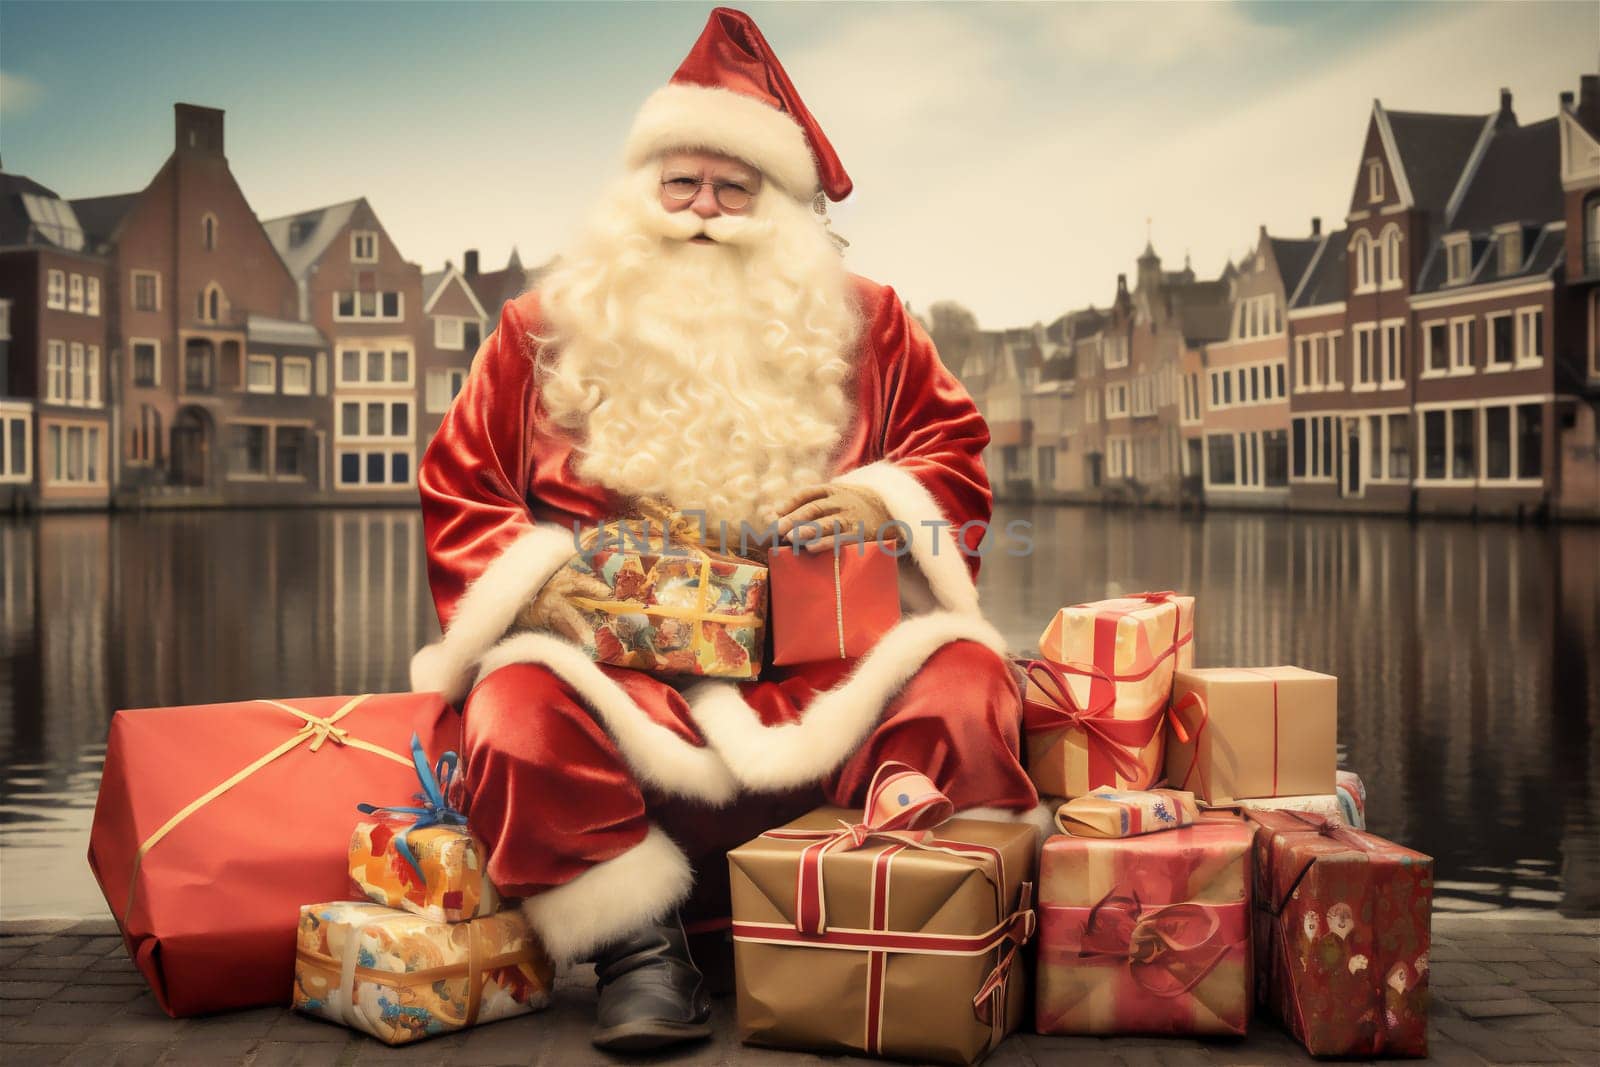 Traditional Dutch Saint Nicholas character Sinterklaas surrounded by colorful gifts sitting near the canal of city somewhere in the Netherlands.